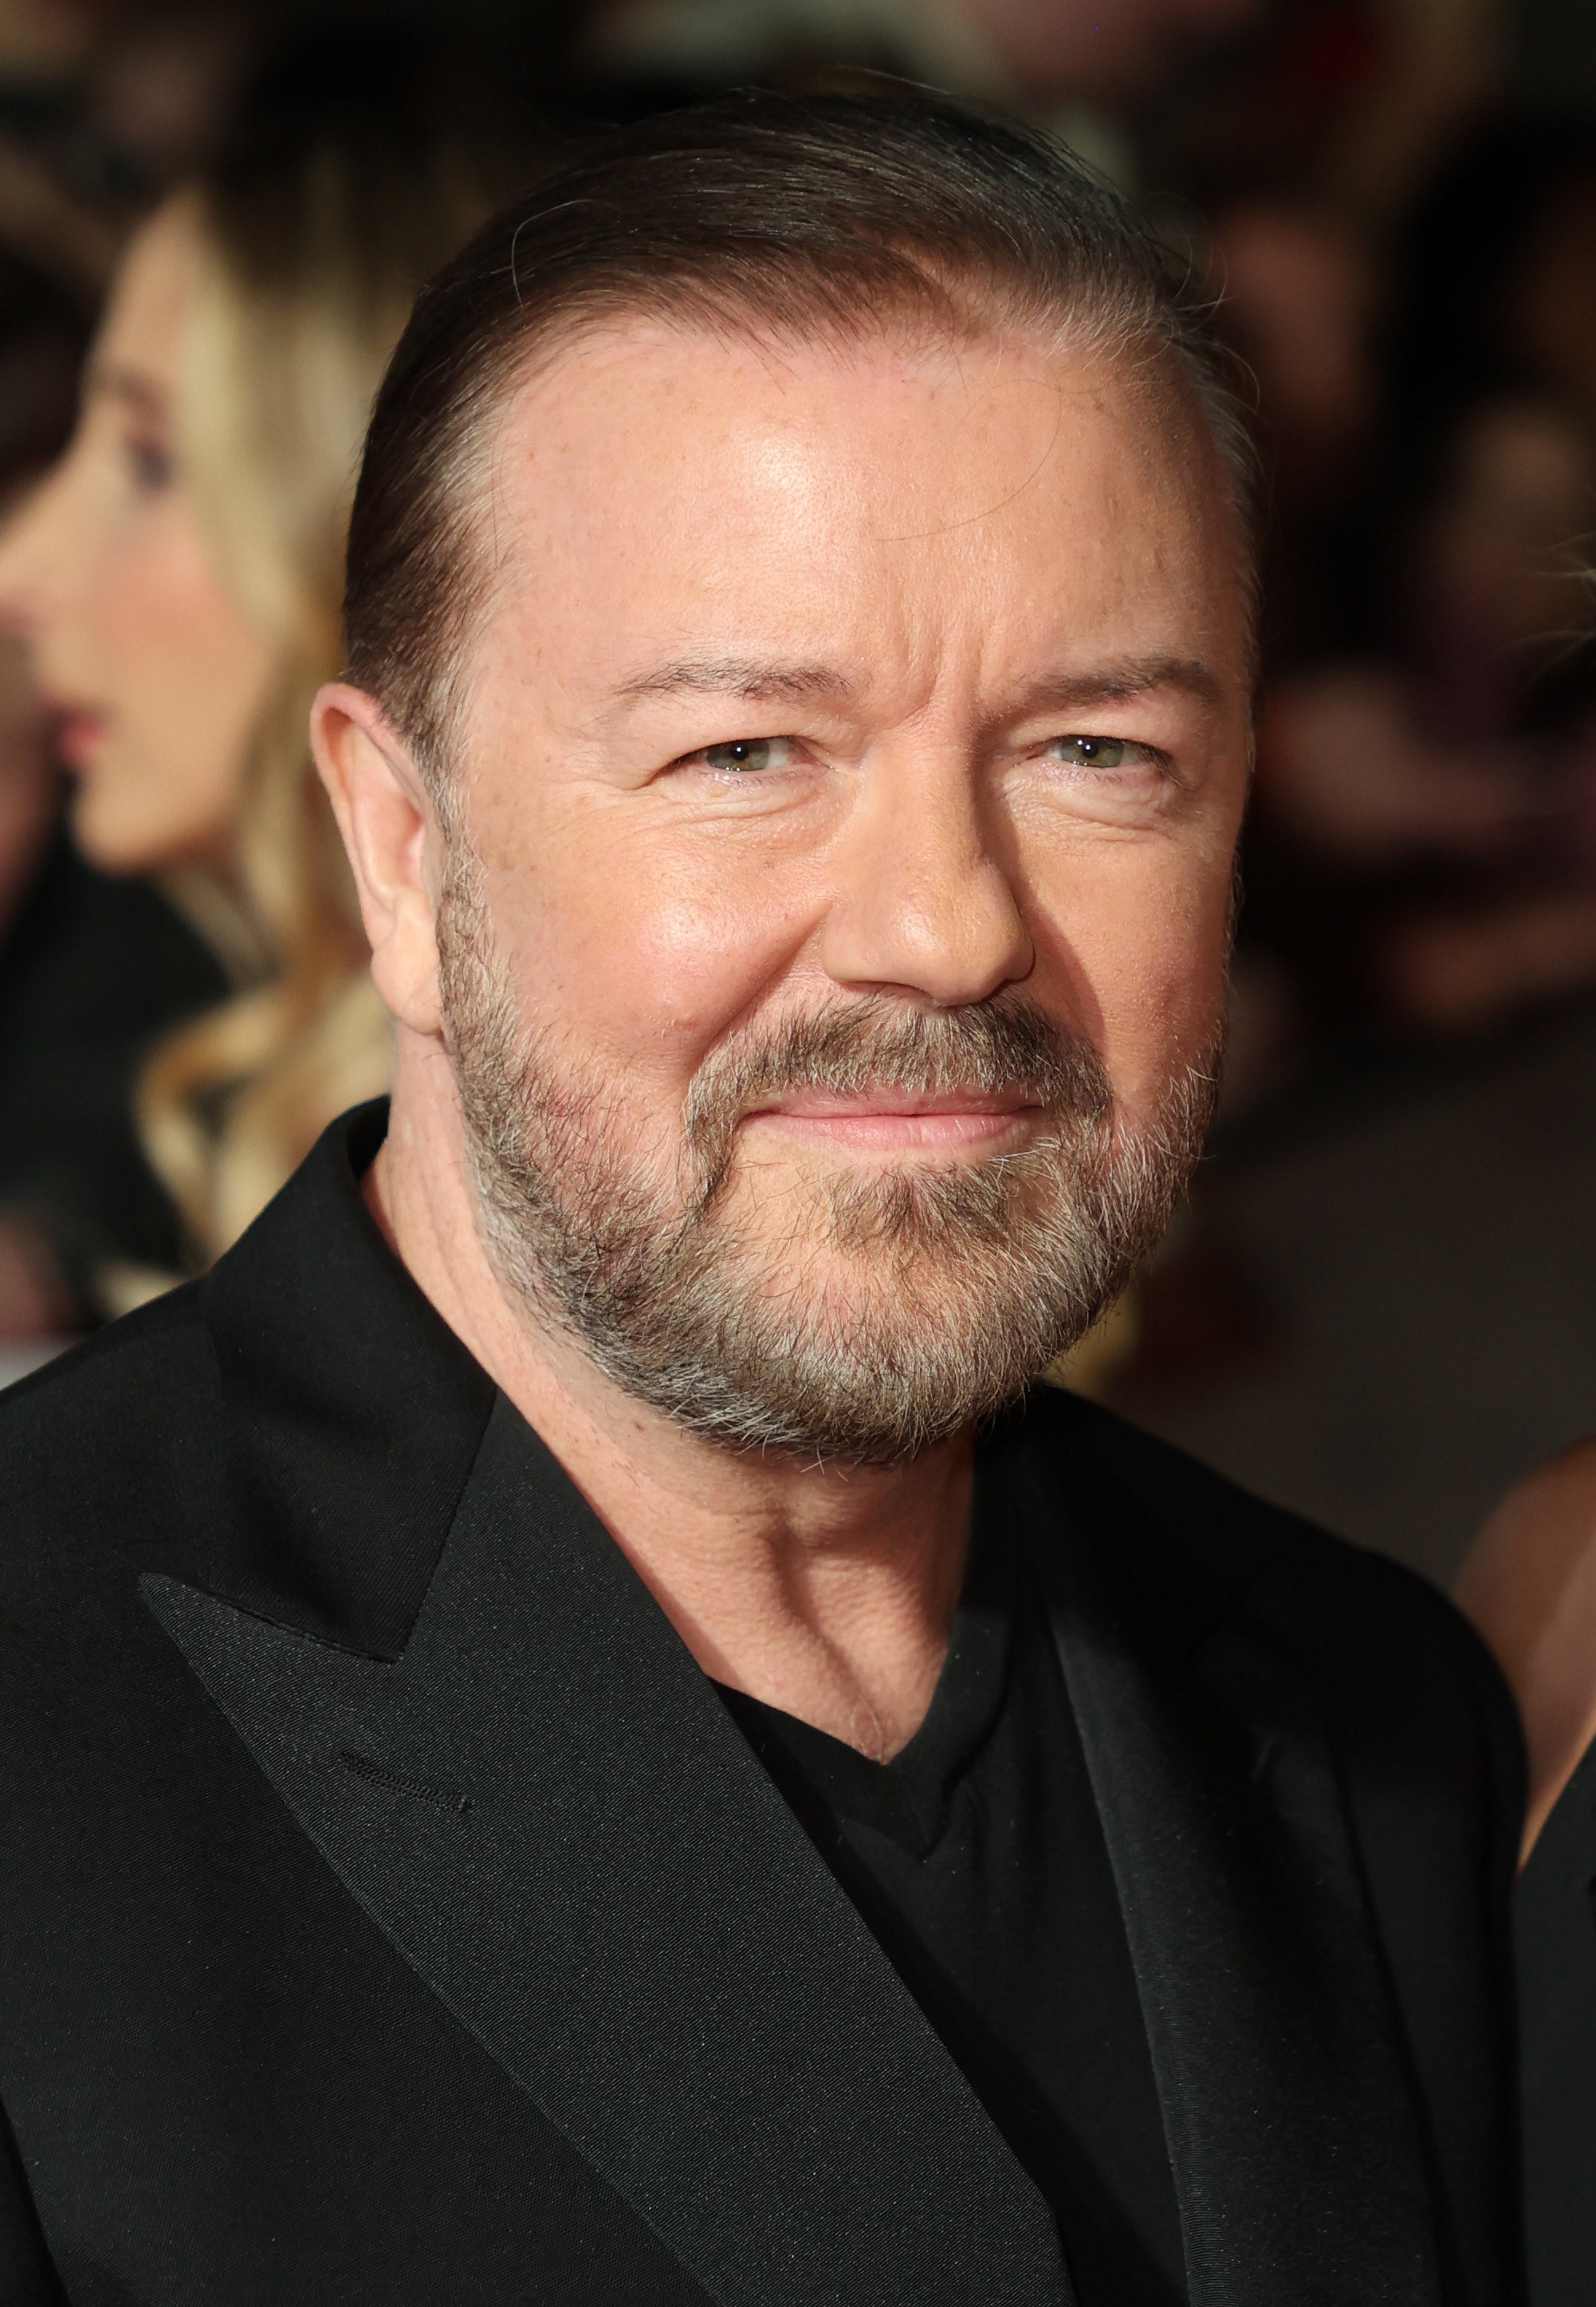 Ricky Gervais on the red carpet